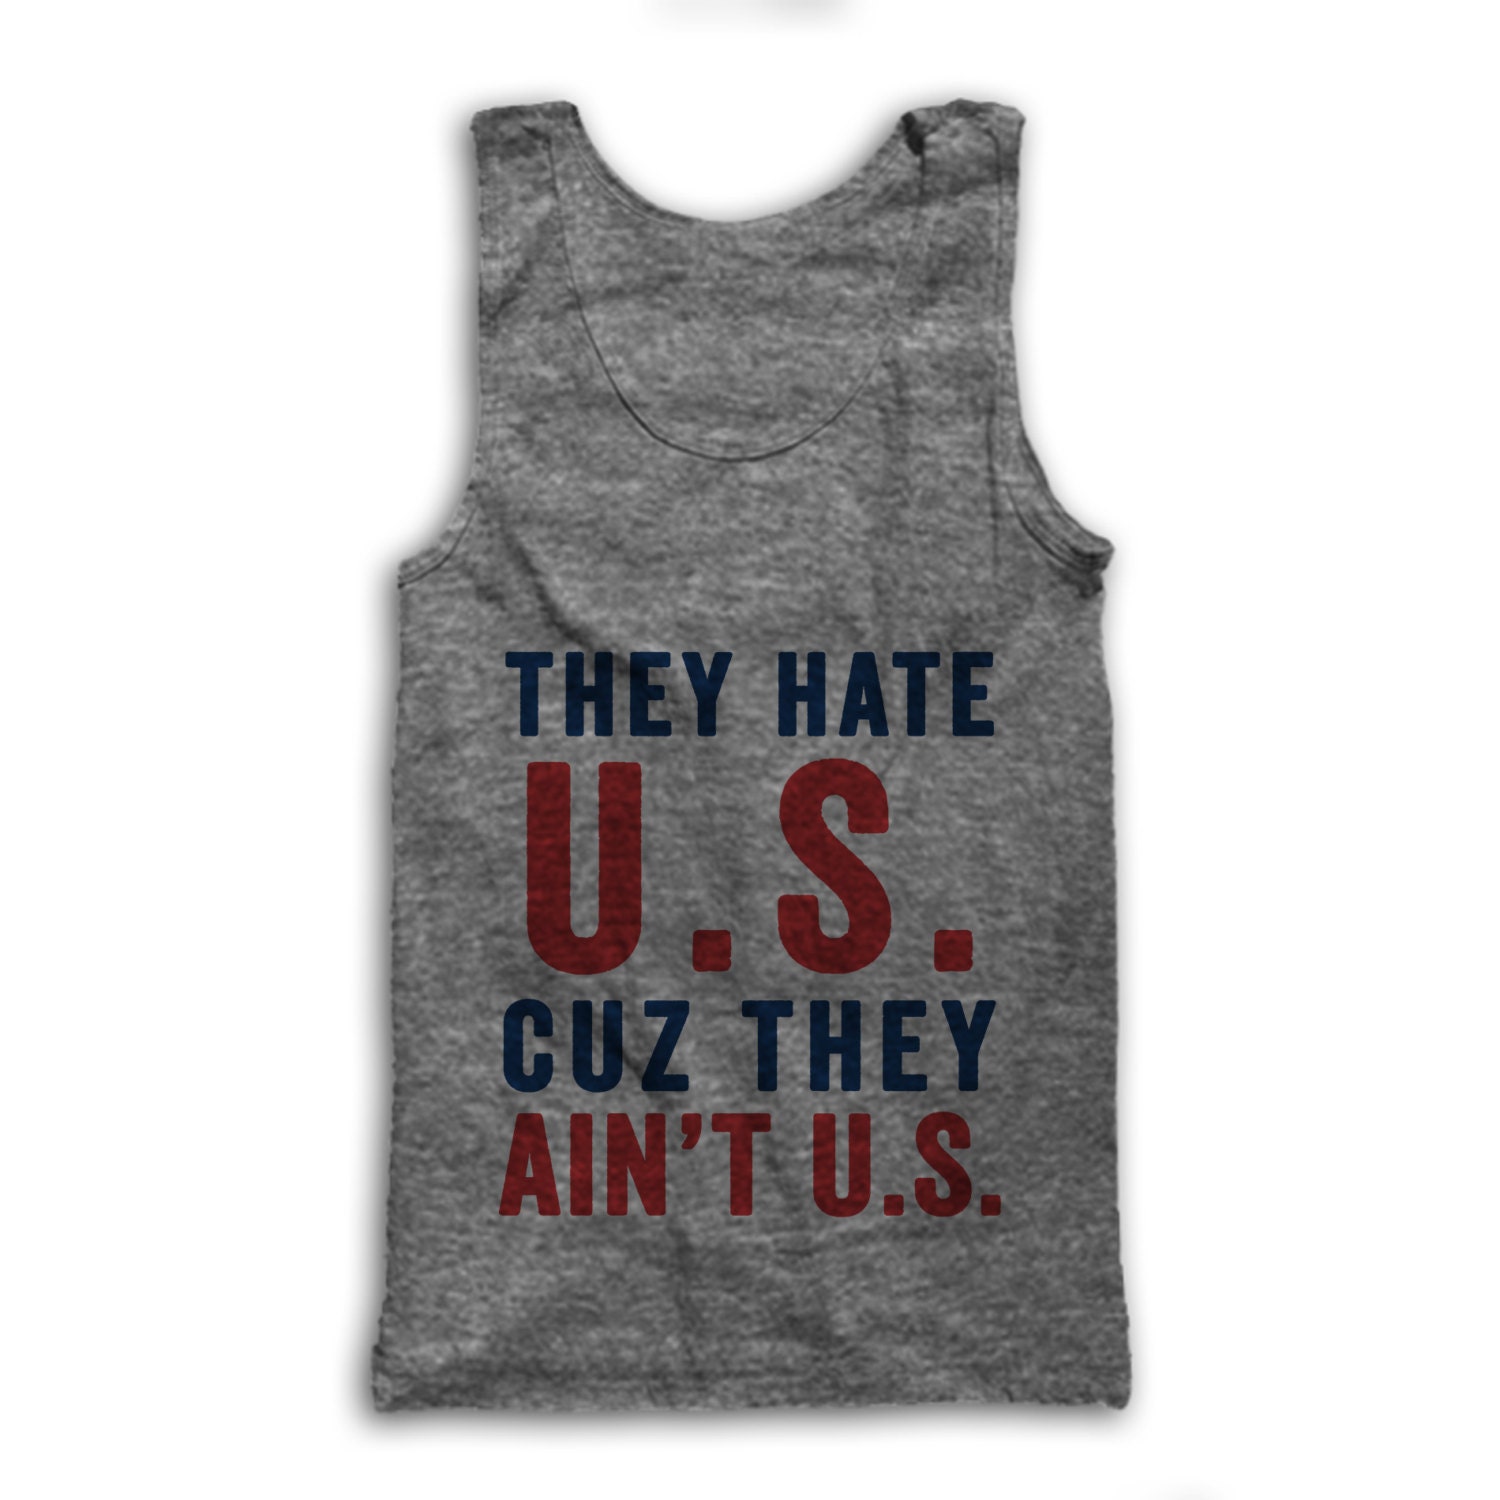 They Hate U.S. Cuz They Aint U.S. by AwesomeBestFriendsTs on Etsy